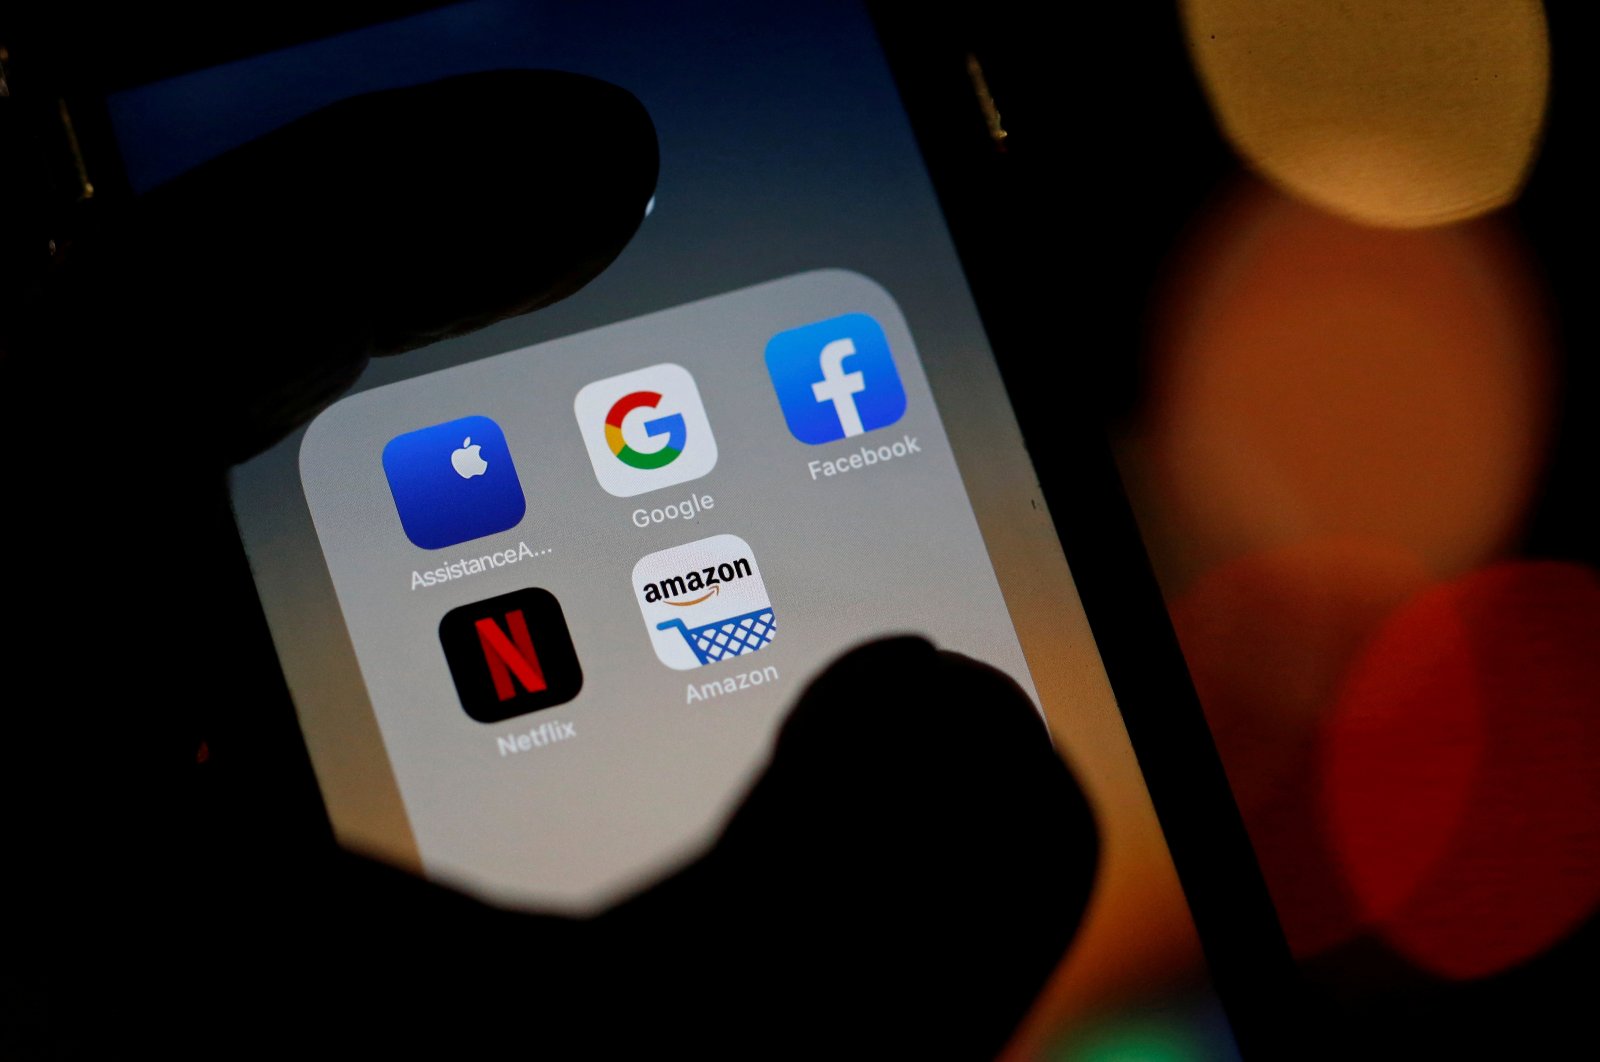 The logos of mobile apps Google, Amazon, Facebook, Apple and Netflix, are displayed on a screen in this illustration picture taken Dec. 3, 2019. (Reuters Photo)